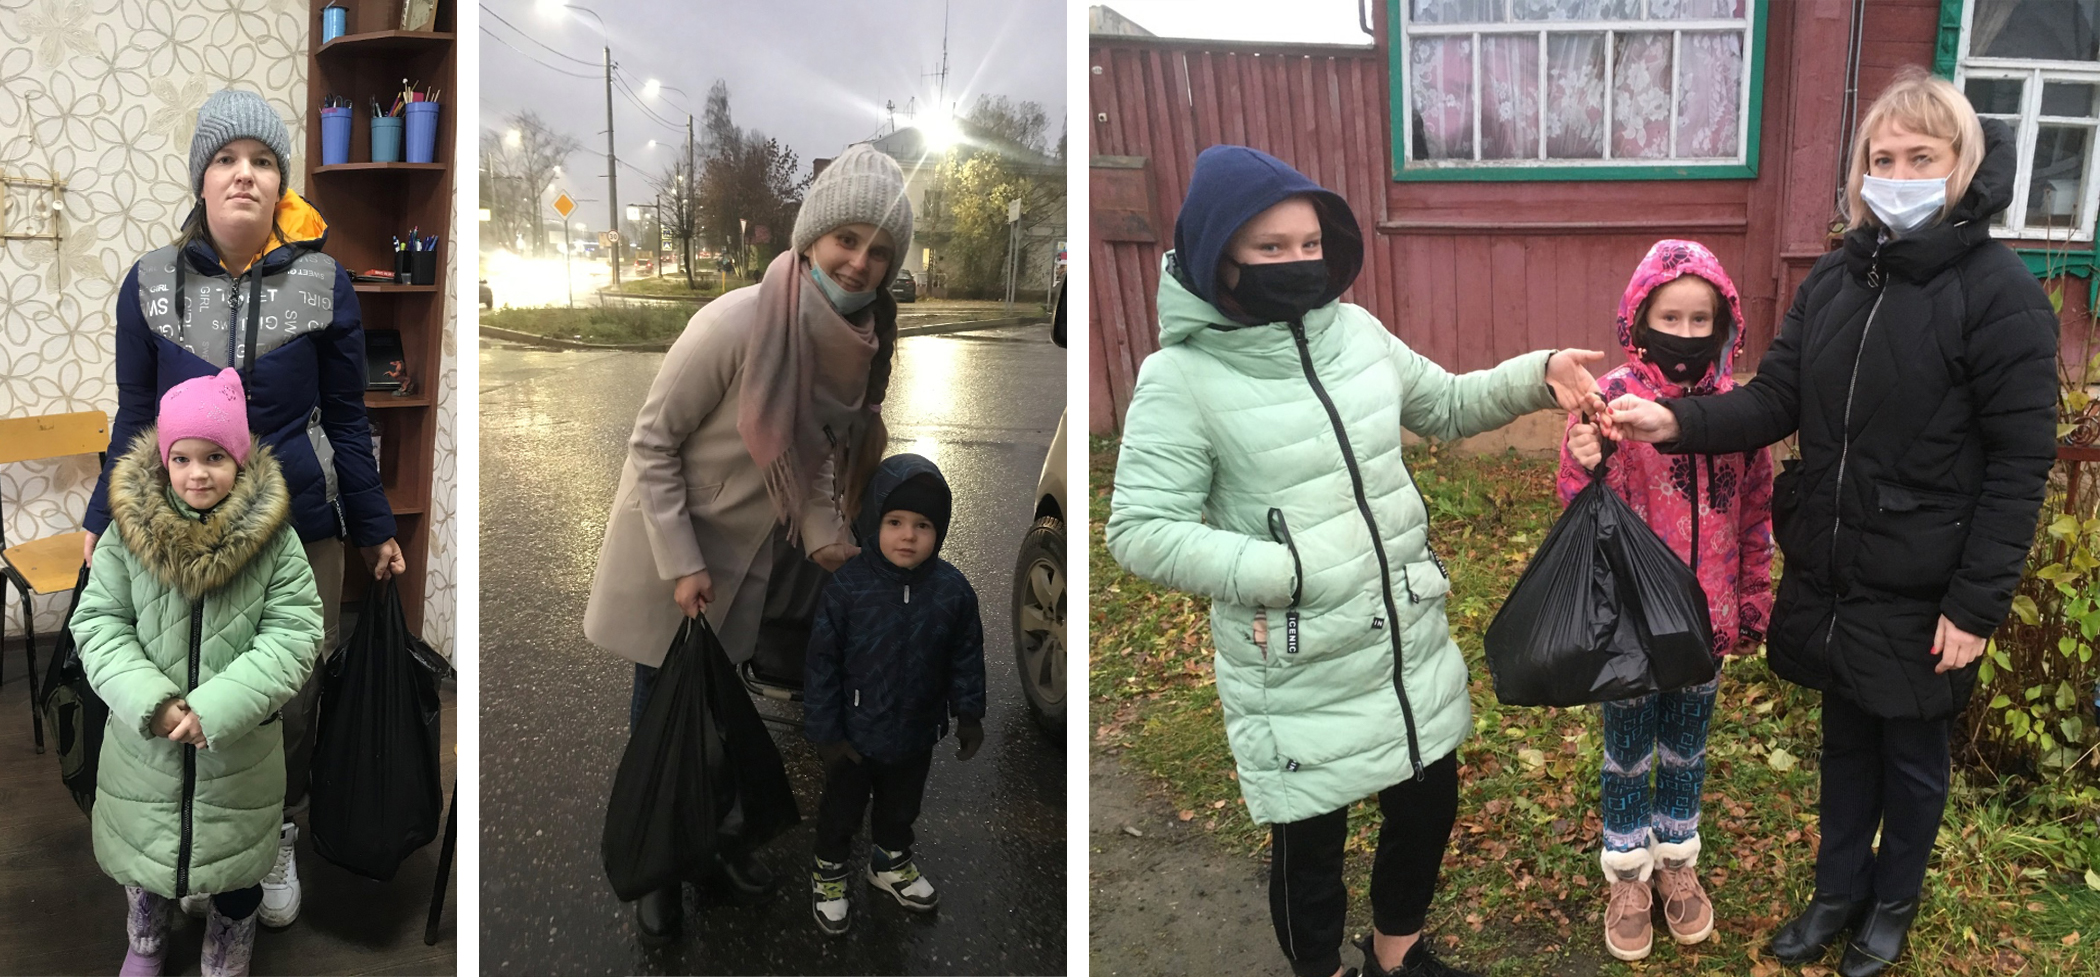 The Krasnoyarsk Orphans Reborn team continues to support orphans after they graduate by delivering bags of groceries for them and their children.